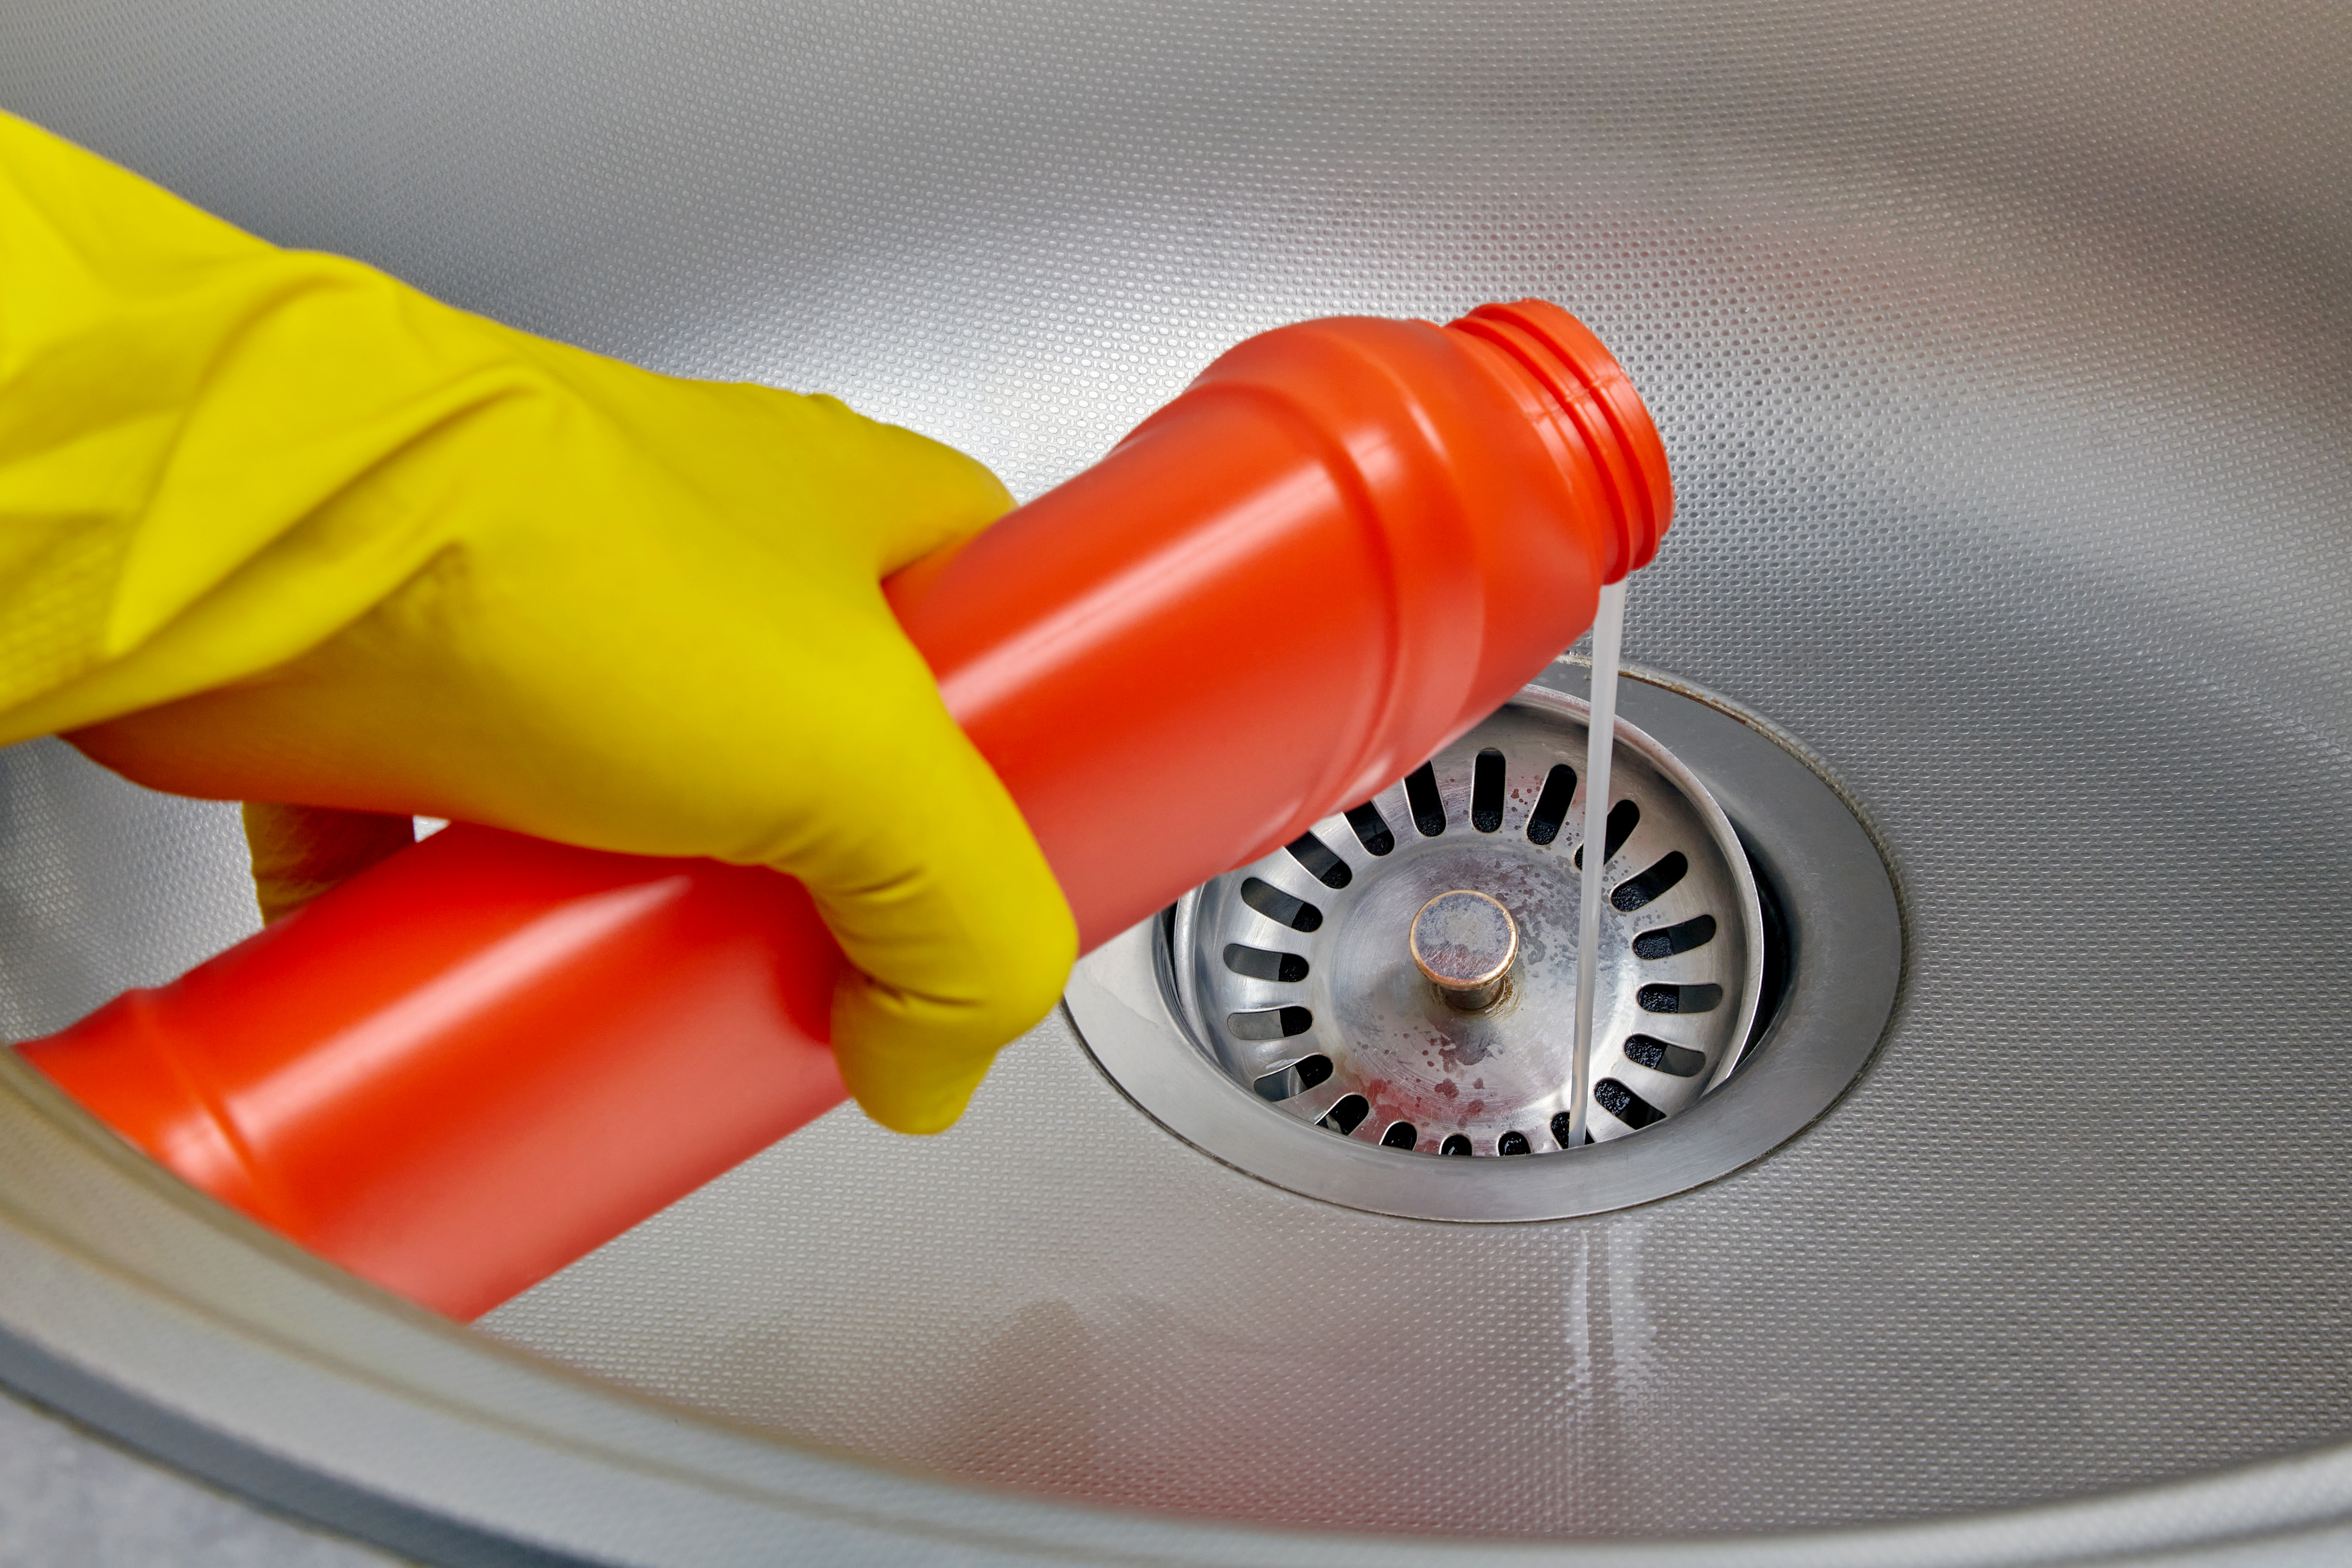 DIY Drain Cleaning & Why It's a Bad Idea